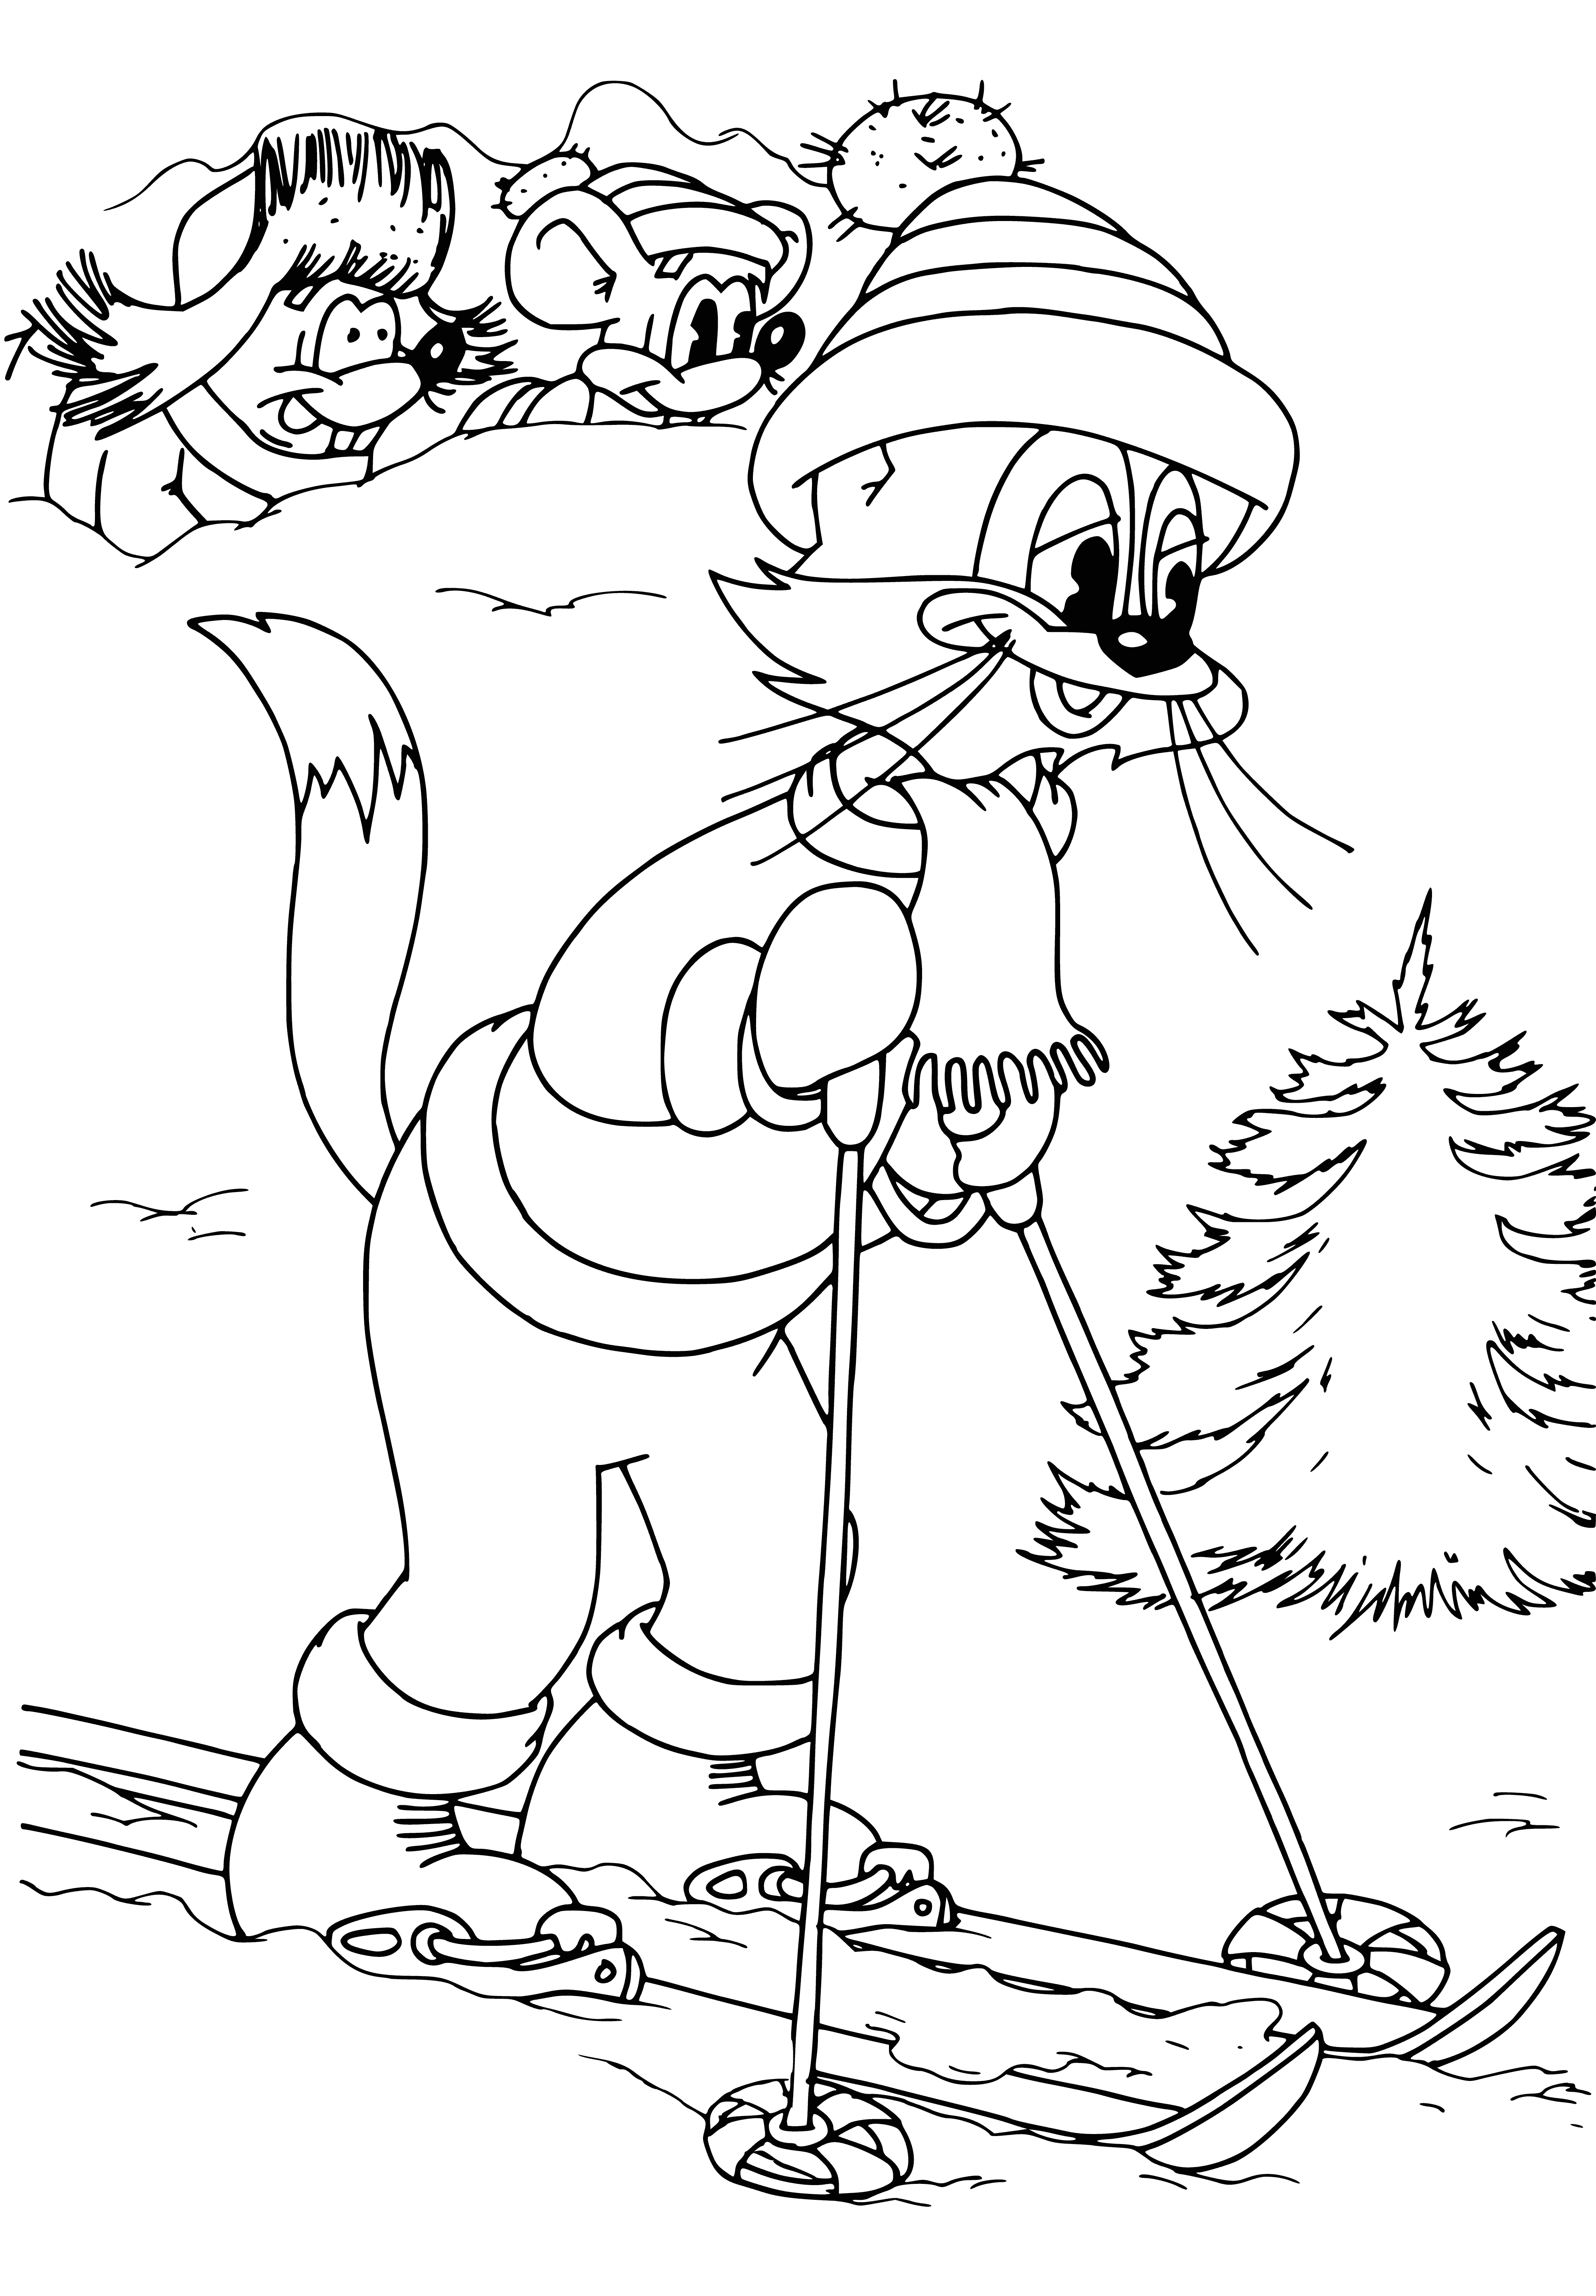 coloring page: Leopold the cat sails down a hill on skis with intense concentration, paws crossed, tail sticking straight out and having a great time!